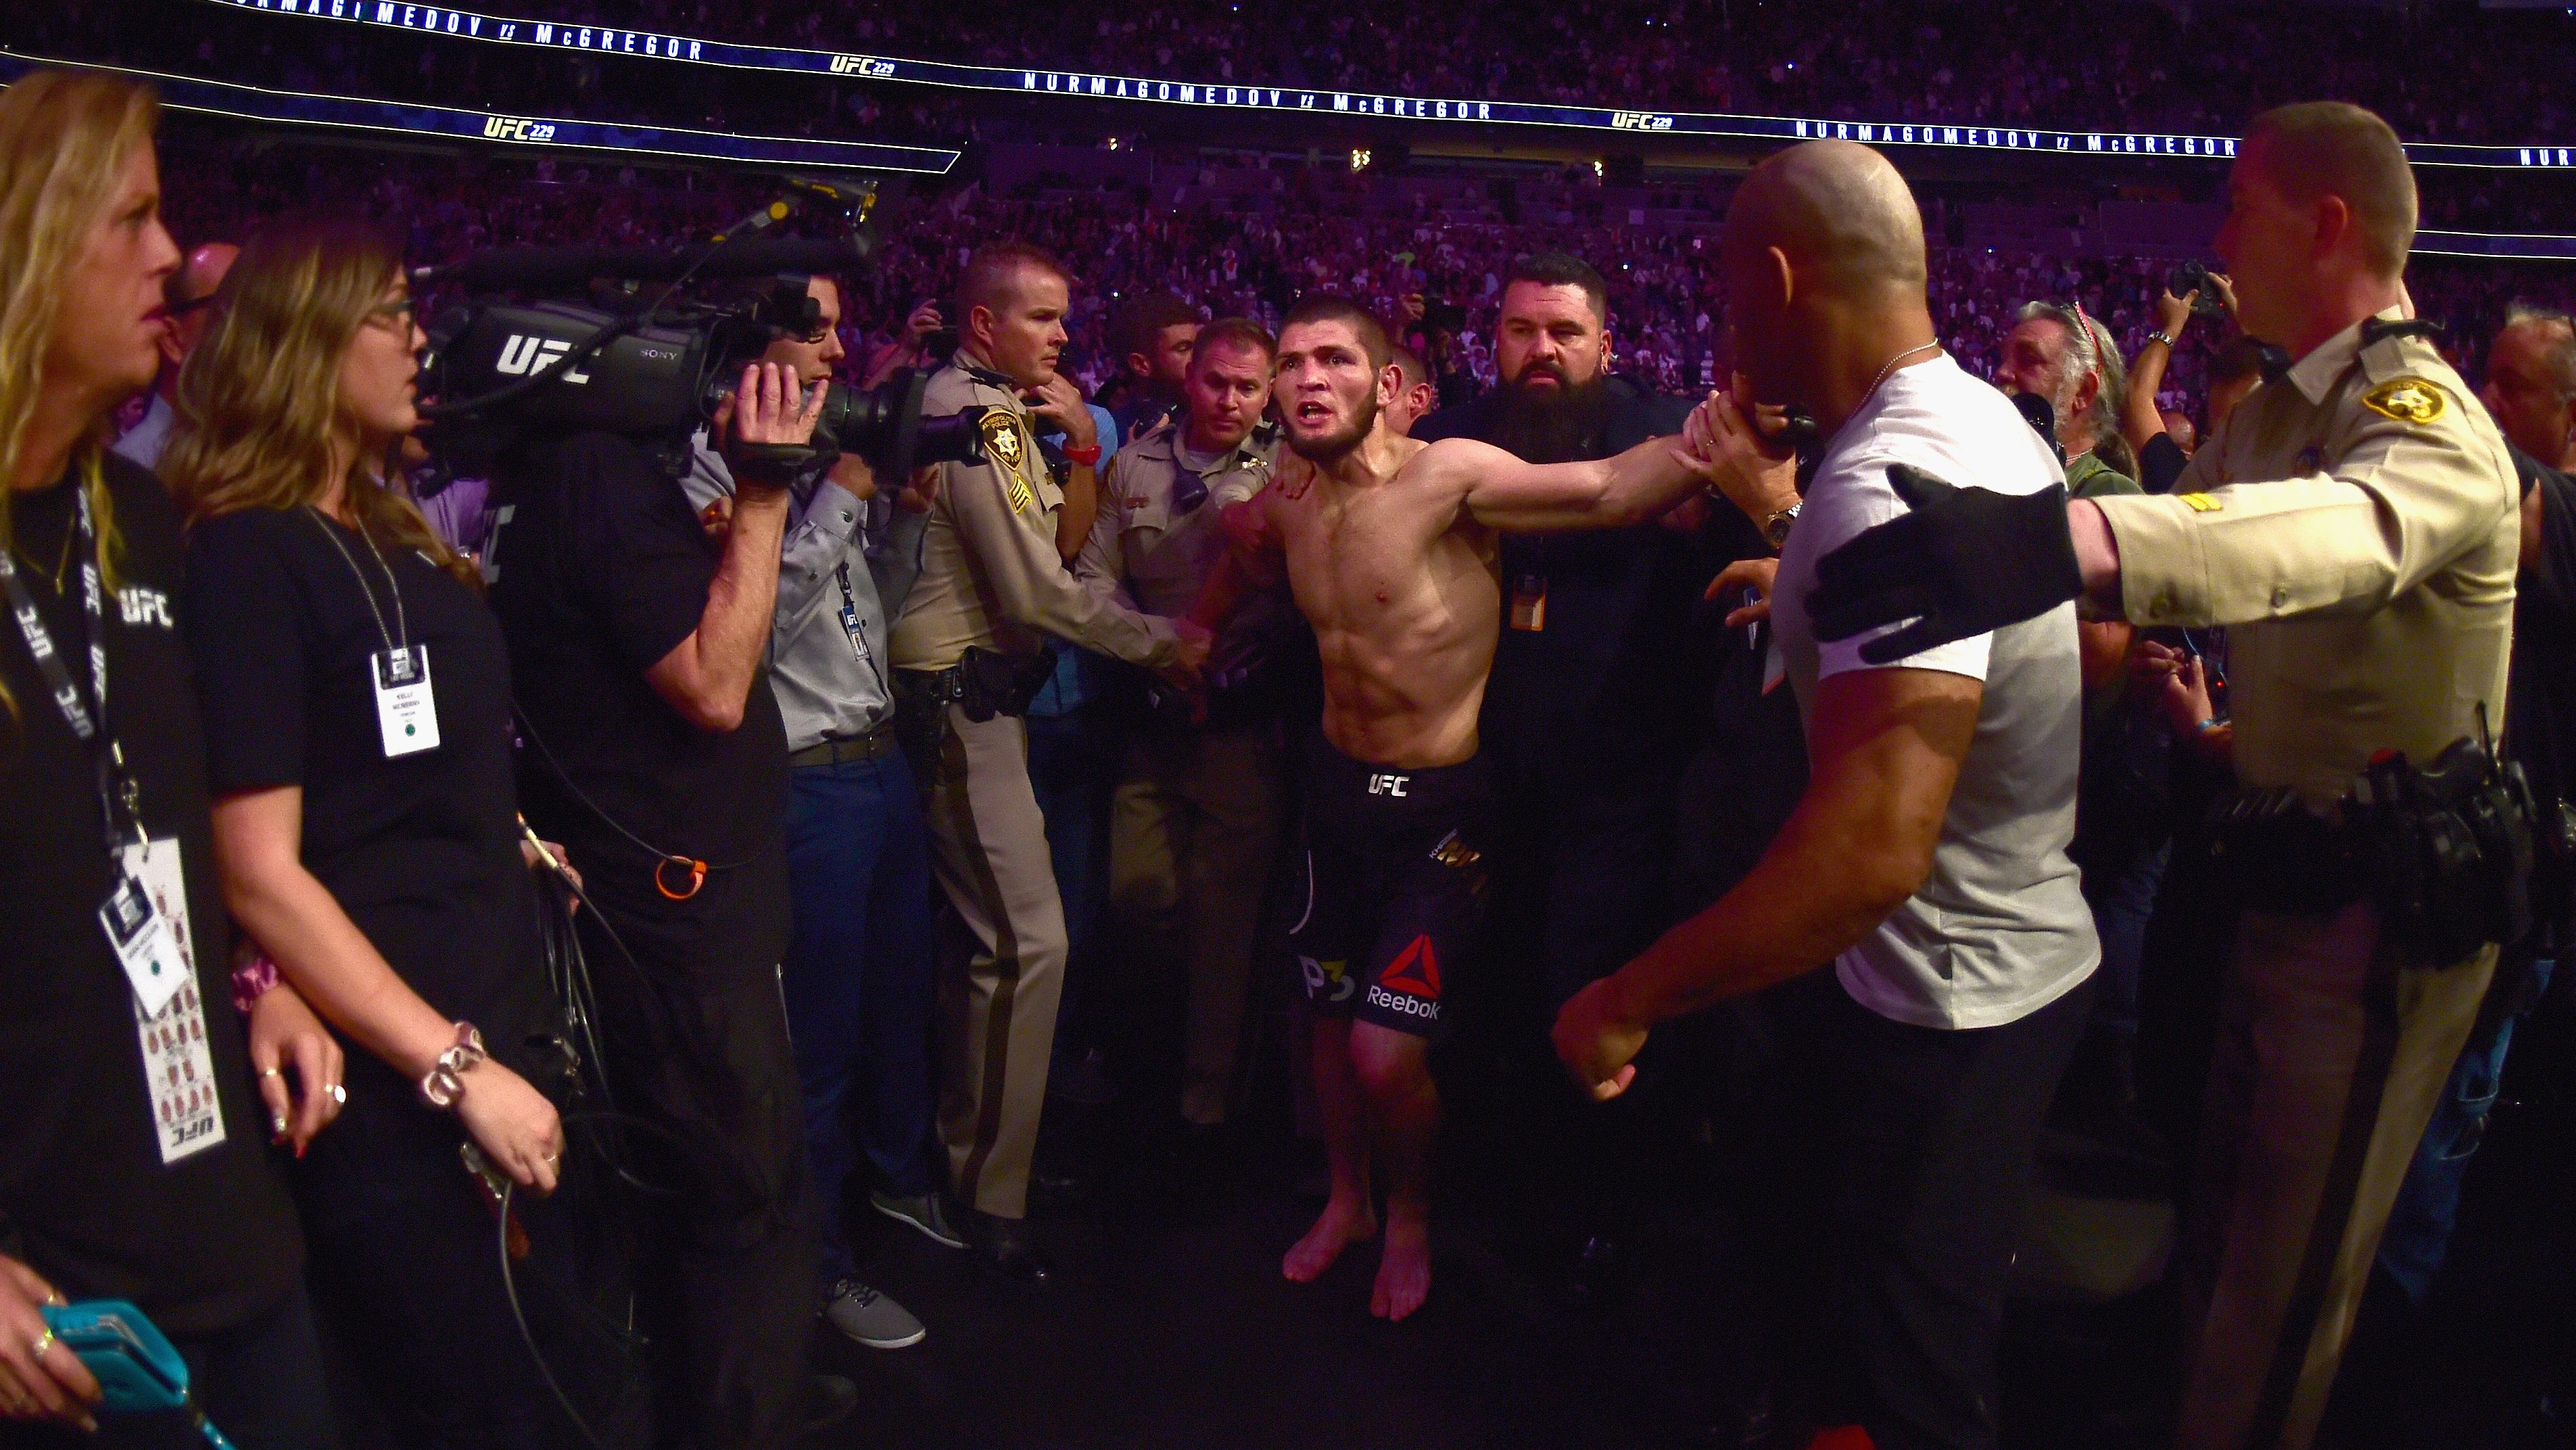 Khabib Nurmagomedov is escorted out of the arena after defeating Conor McGregor.